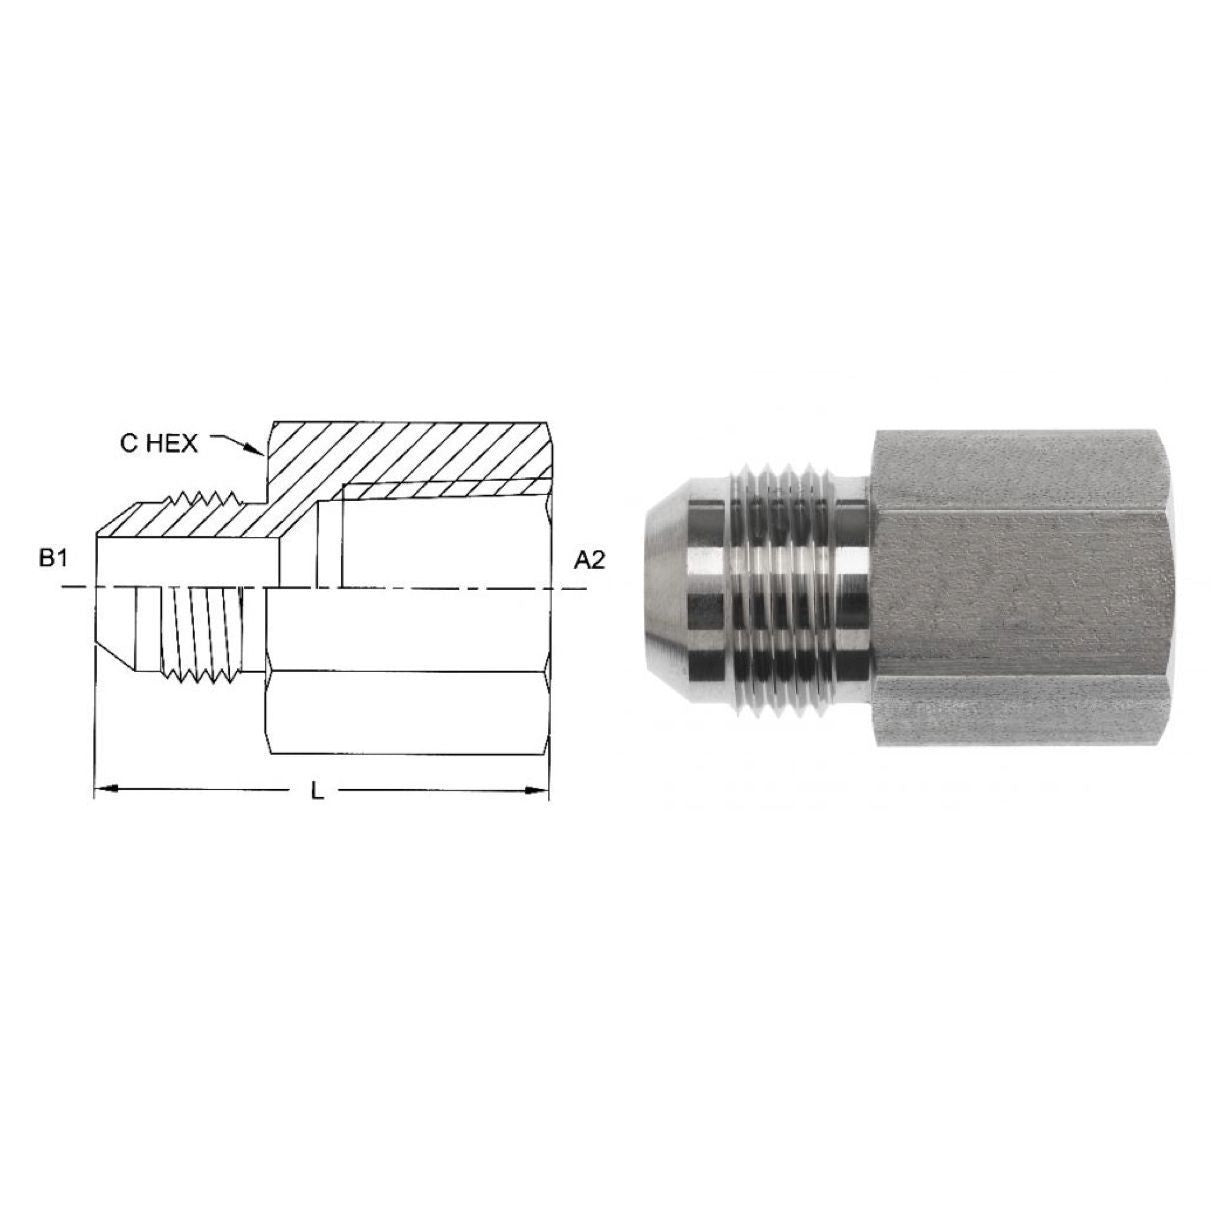 2405-05-02 : OneHydraulics Adapter, Straight, 0.3125 (5/16") Male NPT x 0.125 (1/8") Female, Steel, 6000psi